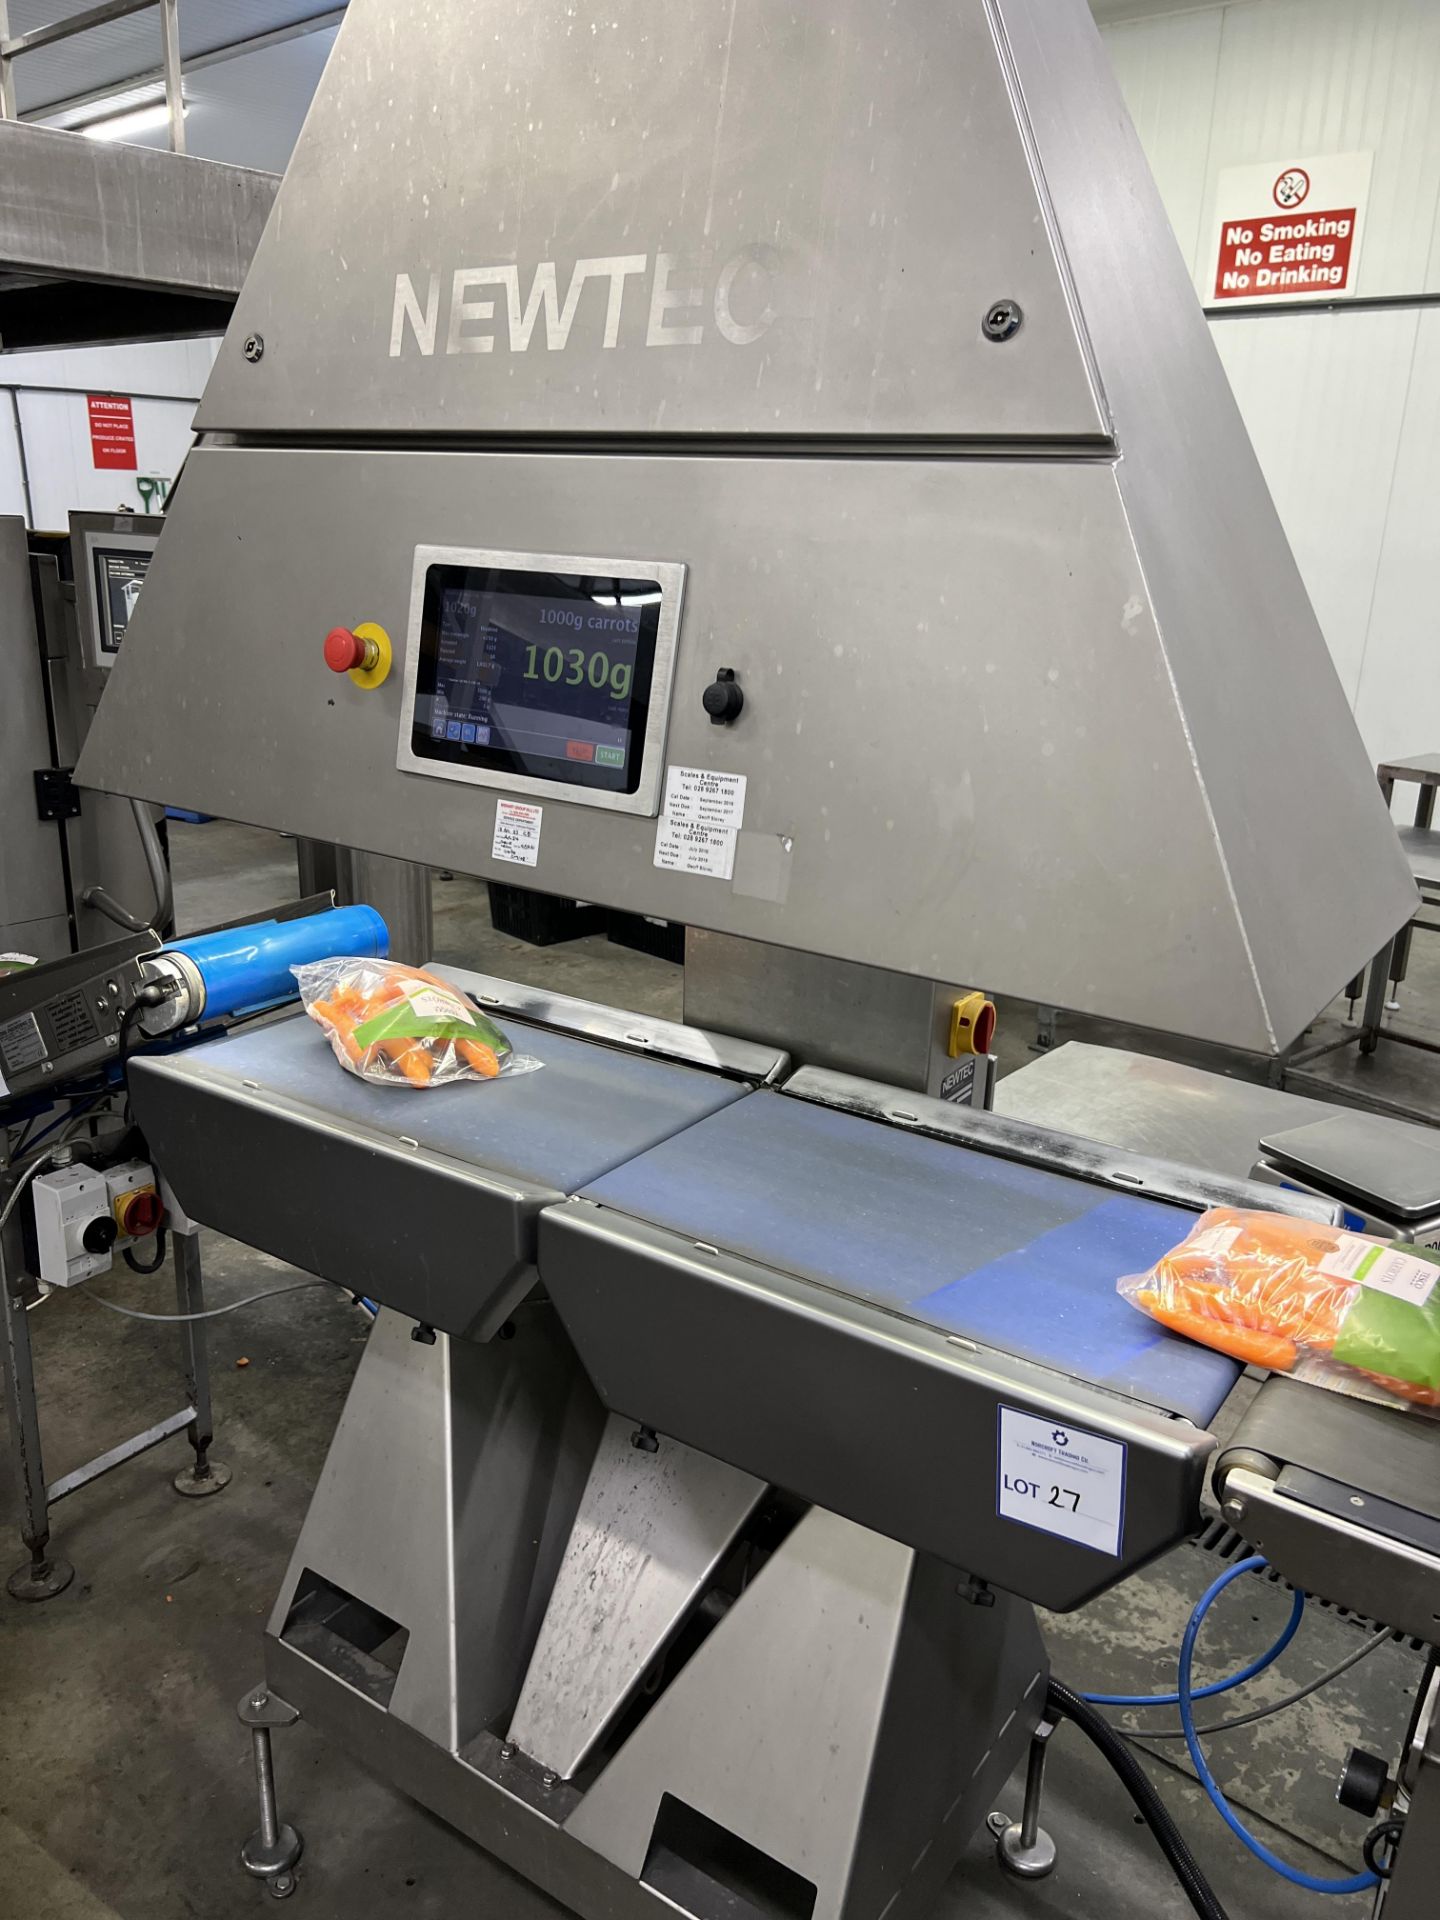 Newtec Check weigher